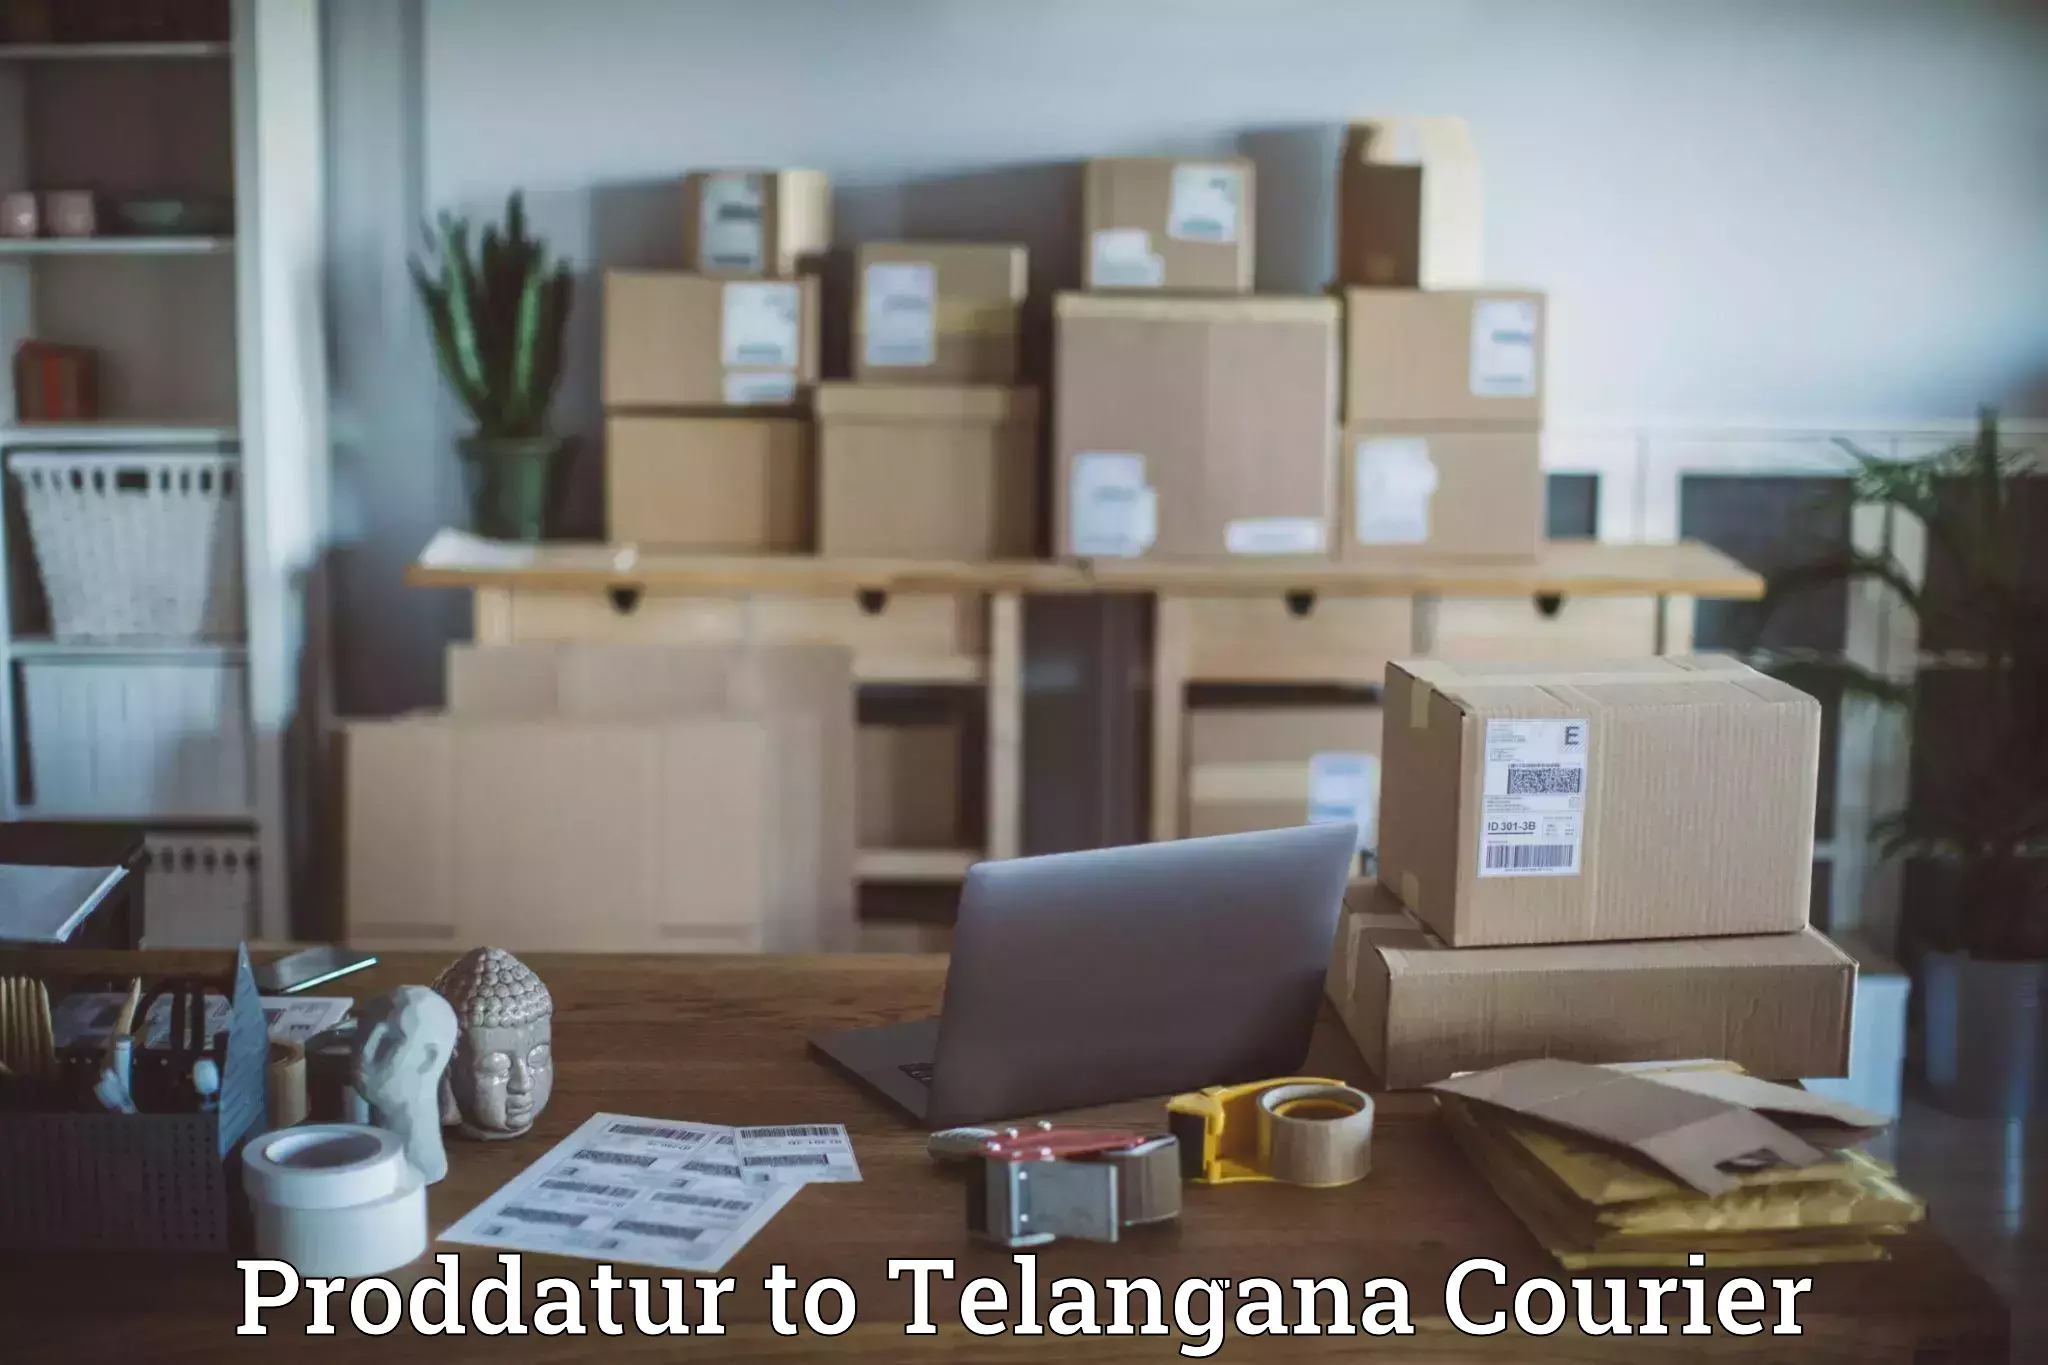 Courier service innovation Proddatur to Vemulawada